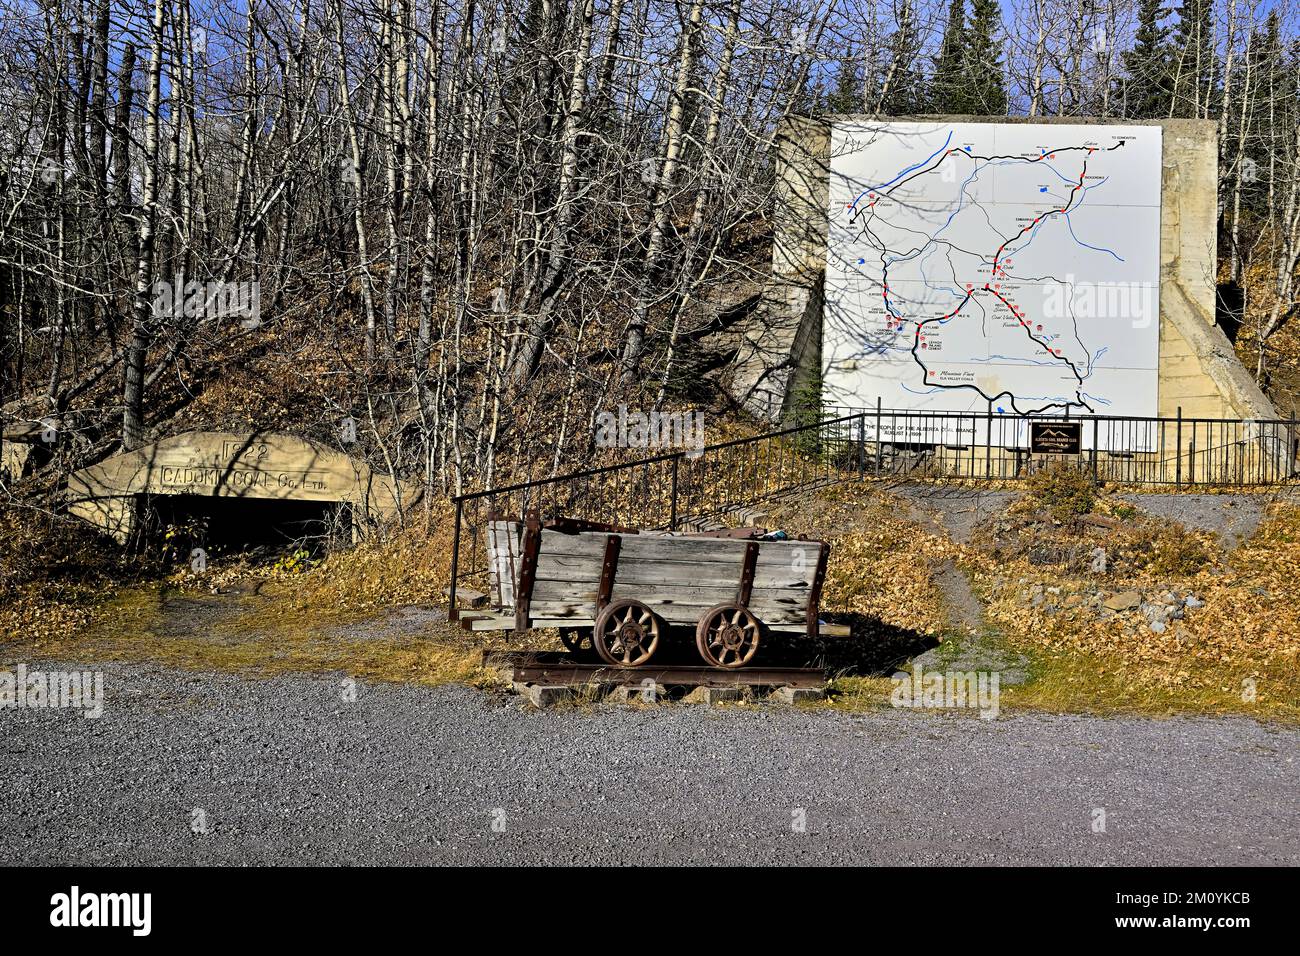 An underground coal mine from the 1920 area in rural Alberta Canada. Stock Photo